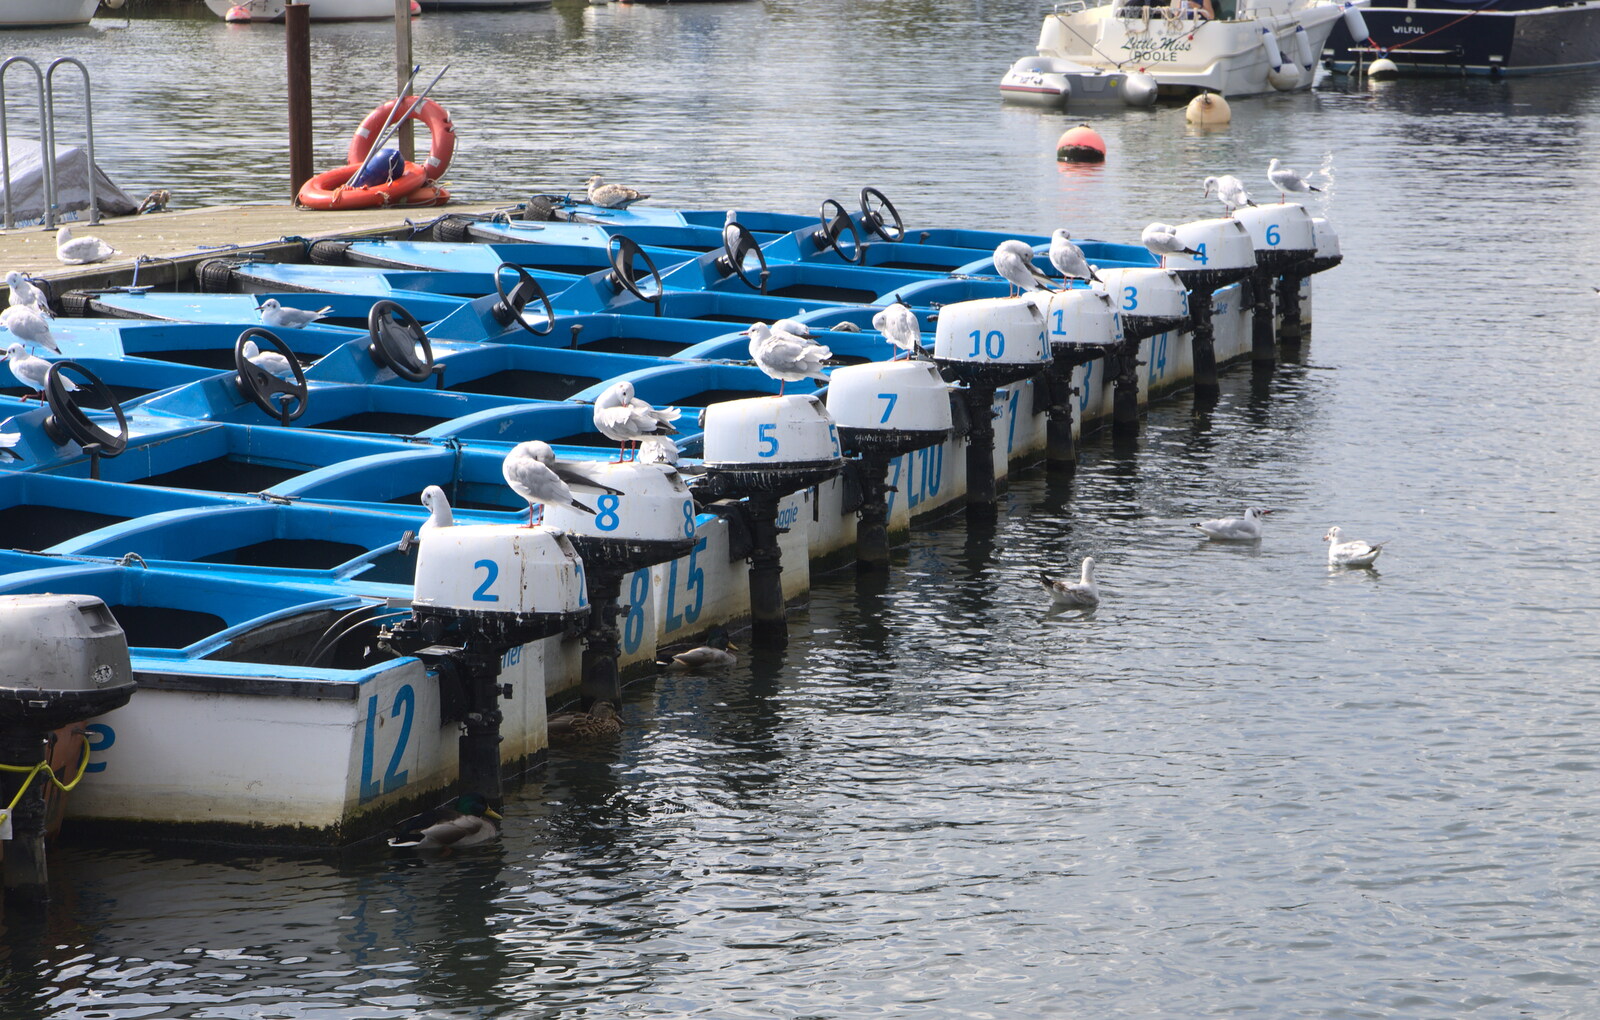 A line of motor boats on the river from Grandmother's Wake, Winkton, Christchurch, Dorset - 18th September 2017